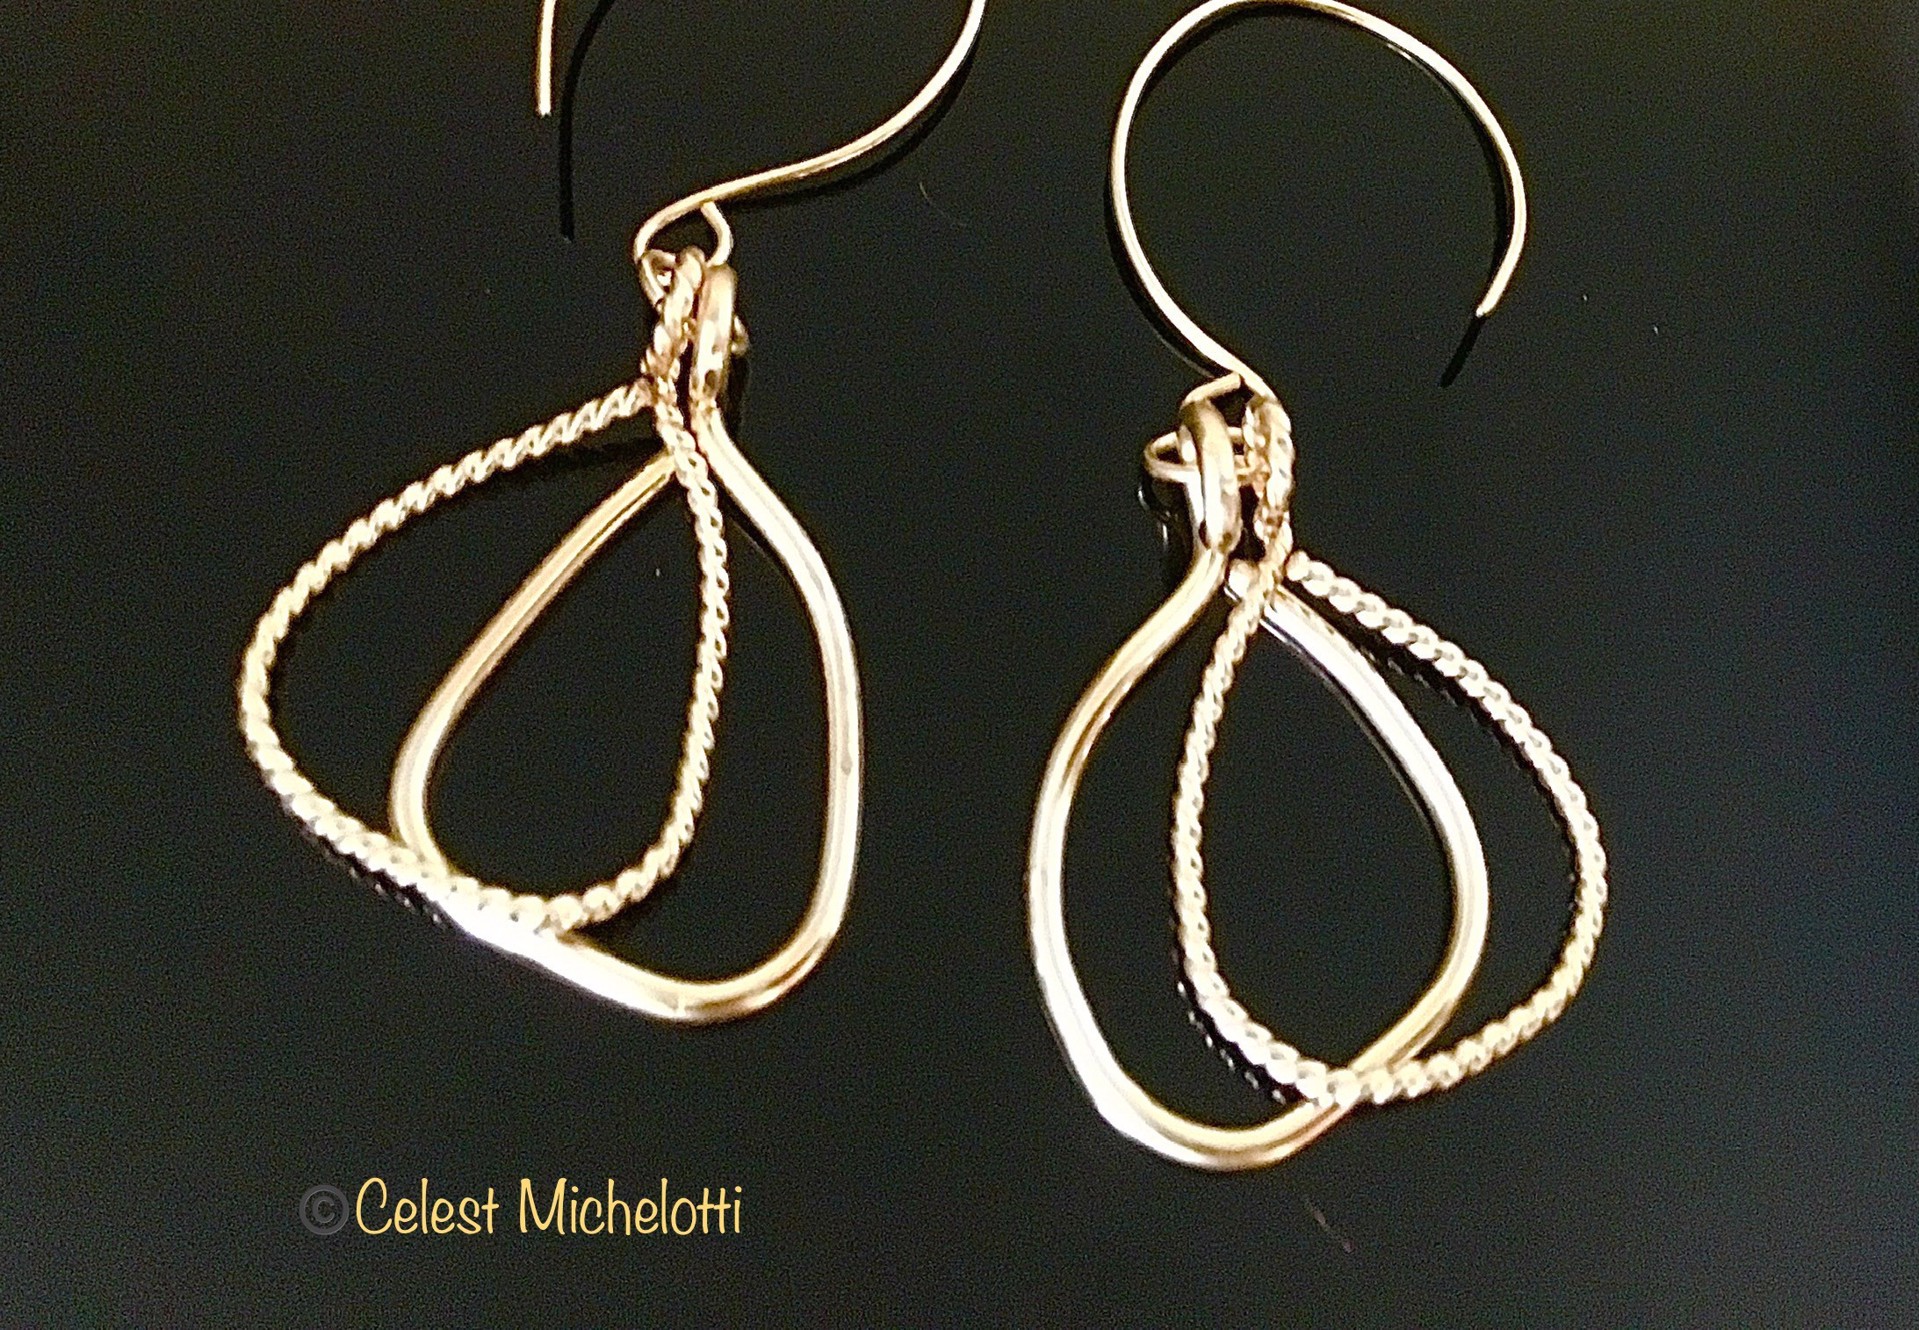 Soft Triangles Earrings, 1 in. Double Drops, 14K Yellow Gold Filled, 14K Rose Gold Filled by Celest Michelotti